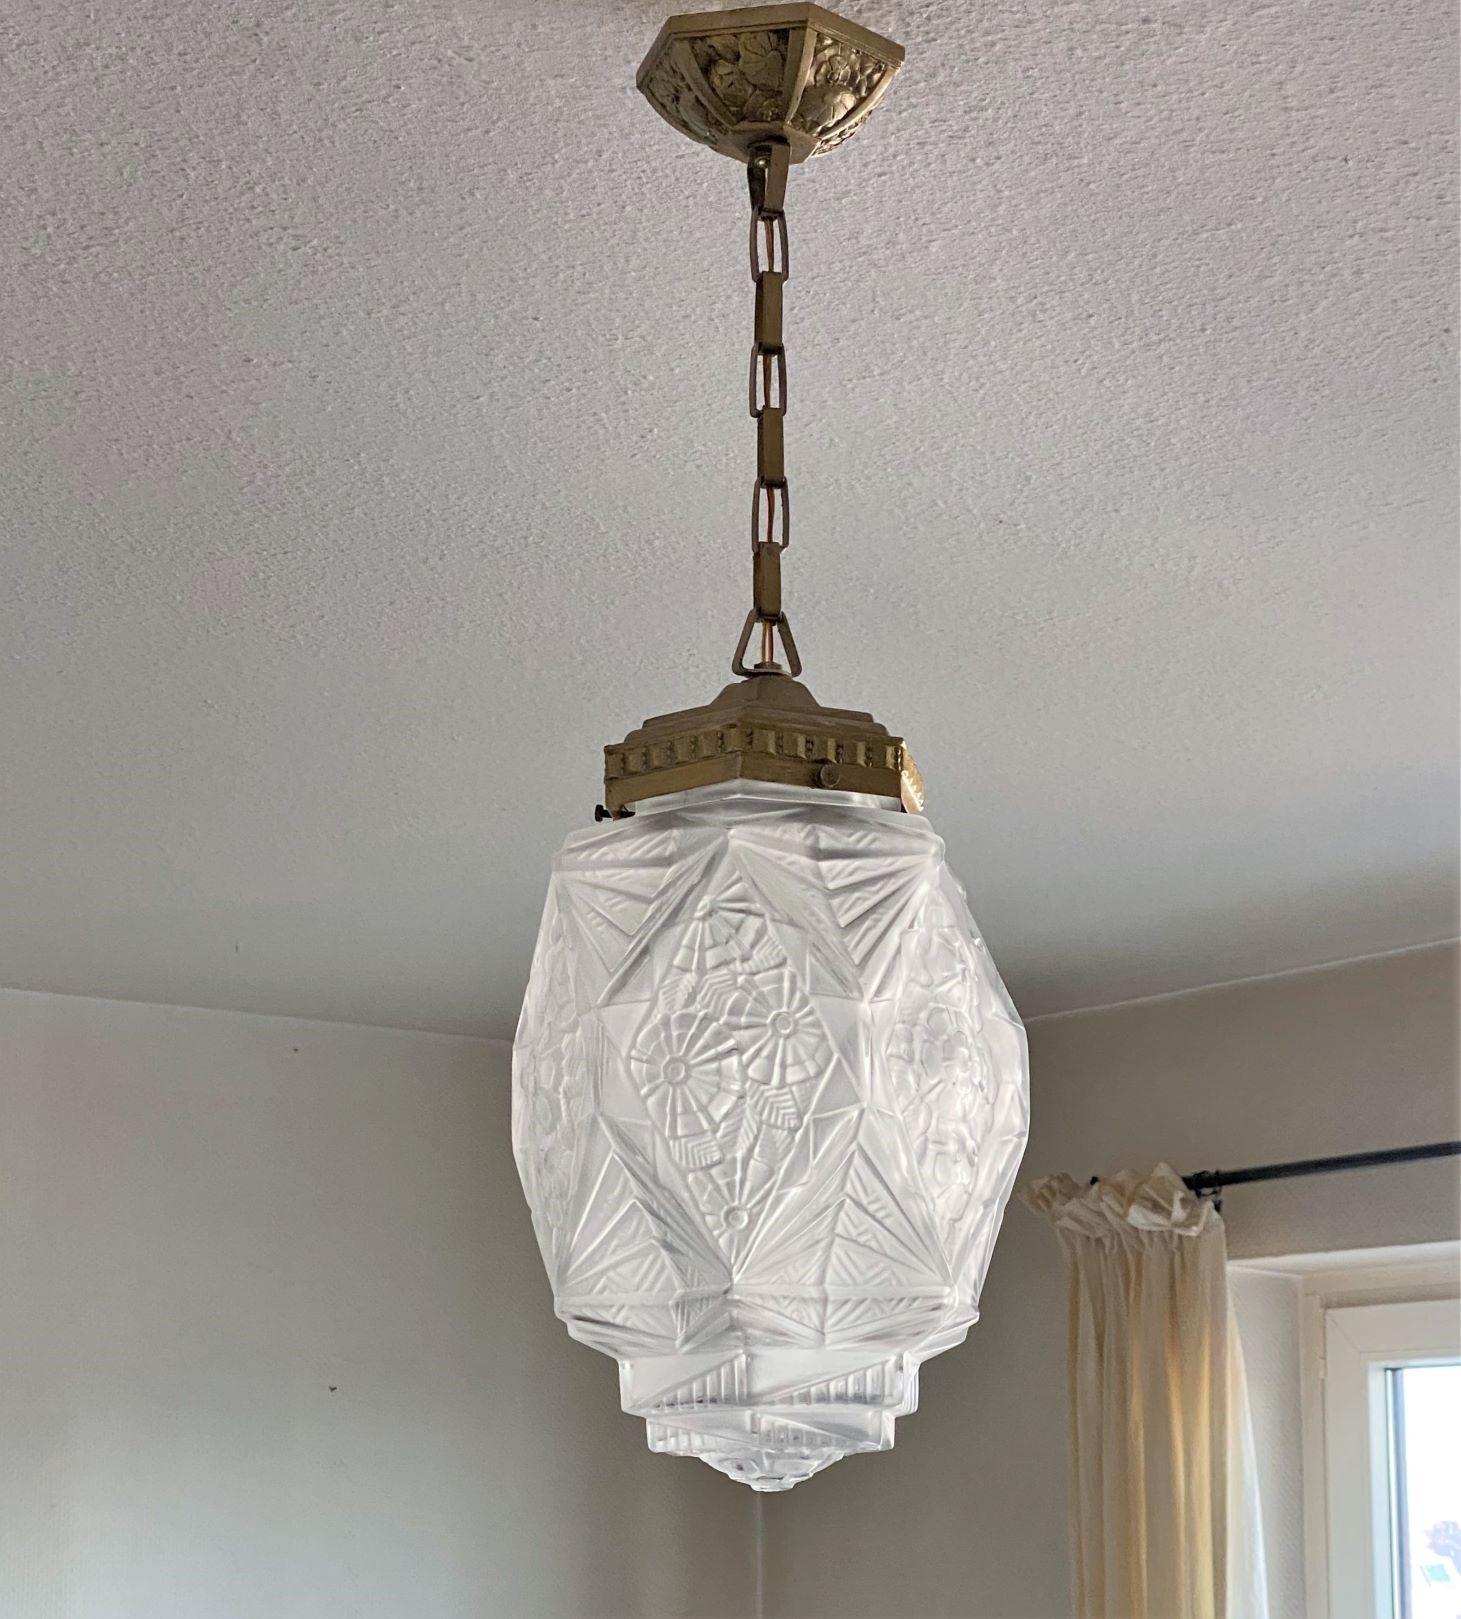 Art Deco pendant in Deguè style, France during early 1930s. Trick, clear frosted glass shade with geometric themed reliefs, original nickel plating mounts with beautiful ceiling canopy. It takes one large sized Edison E27 bulb up to 100 watts. In